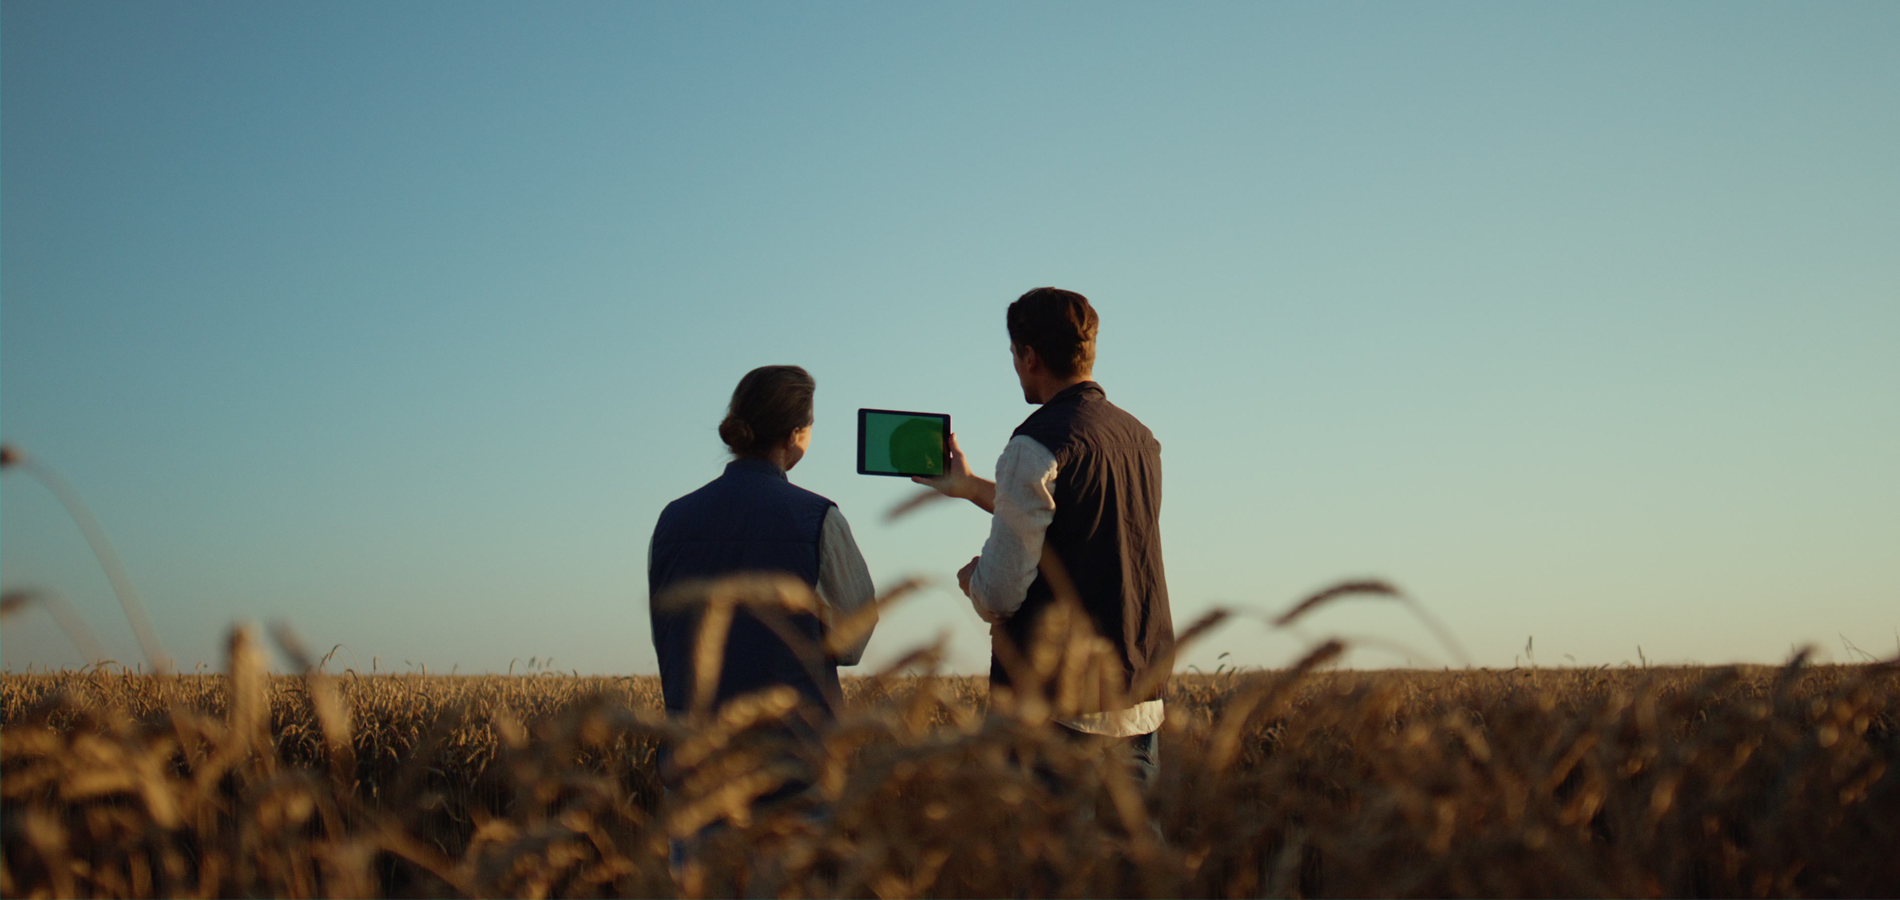 Two people inspect a wheat field